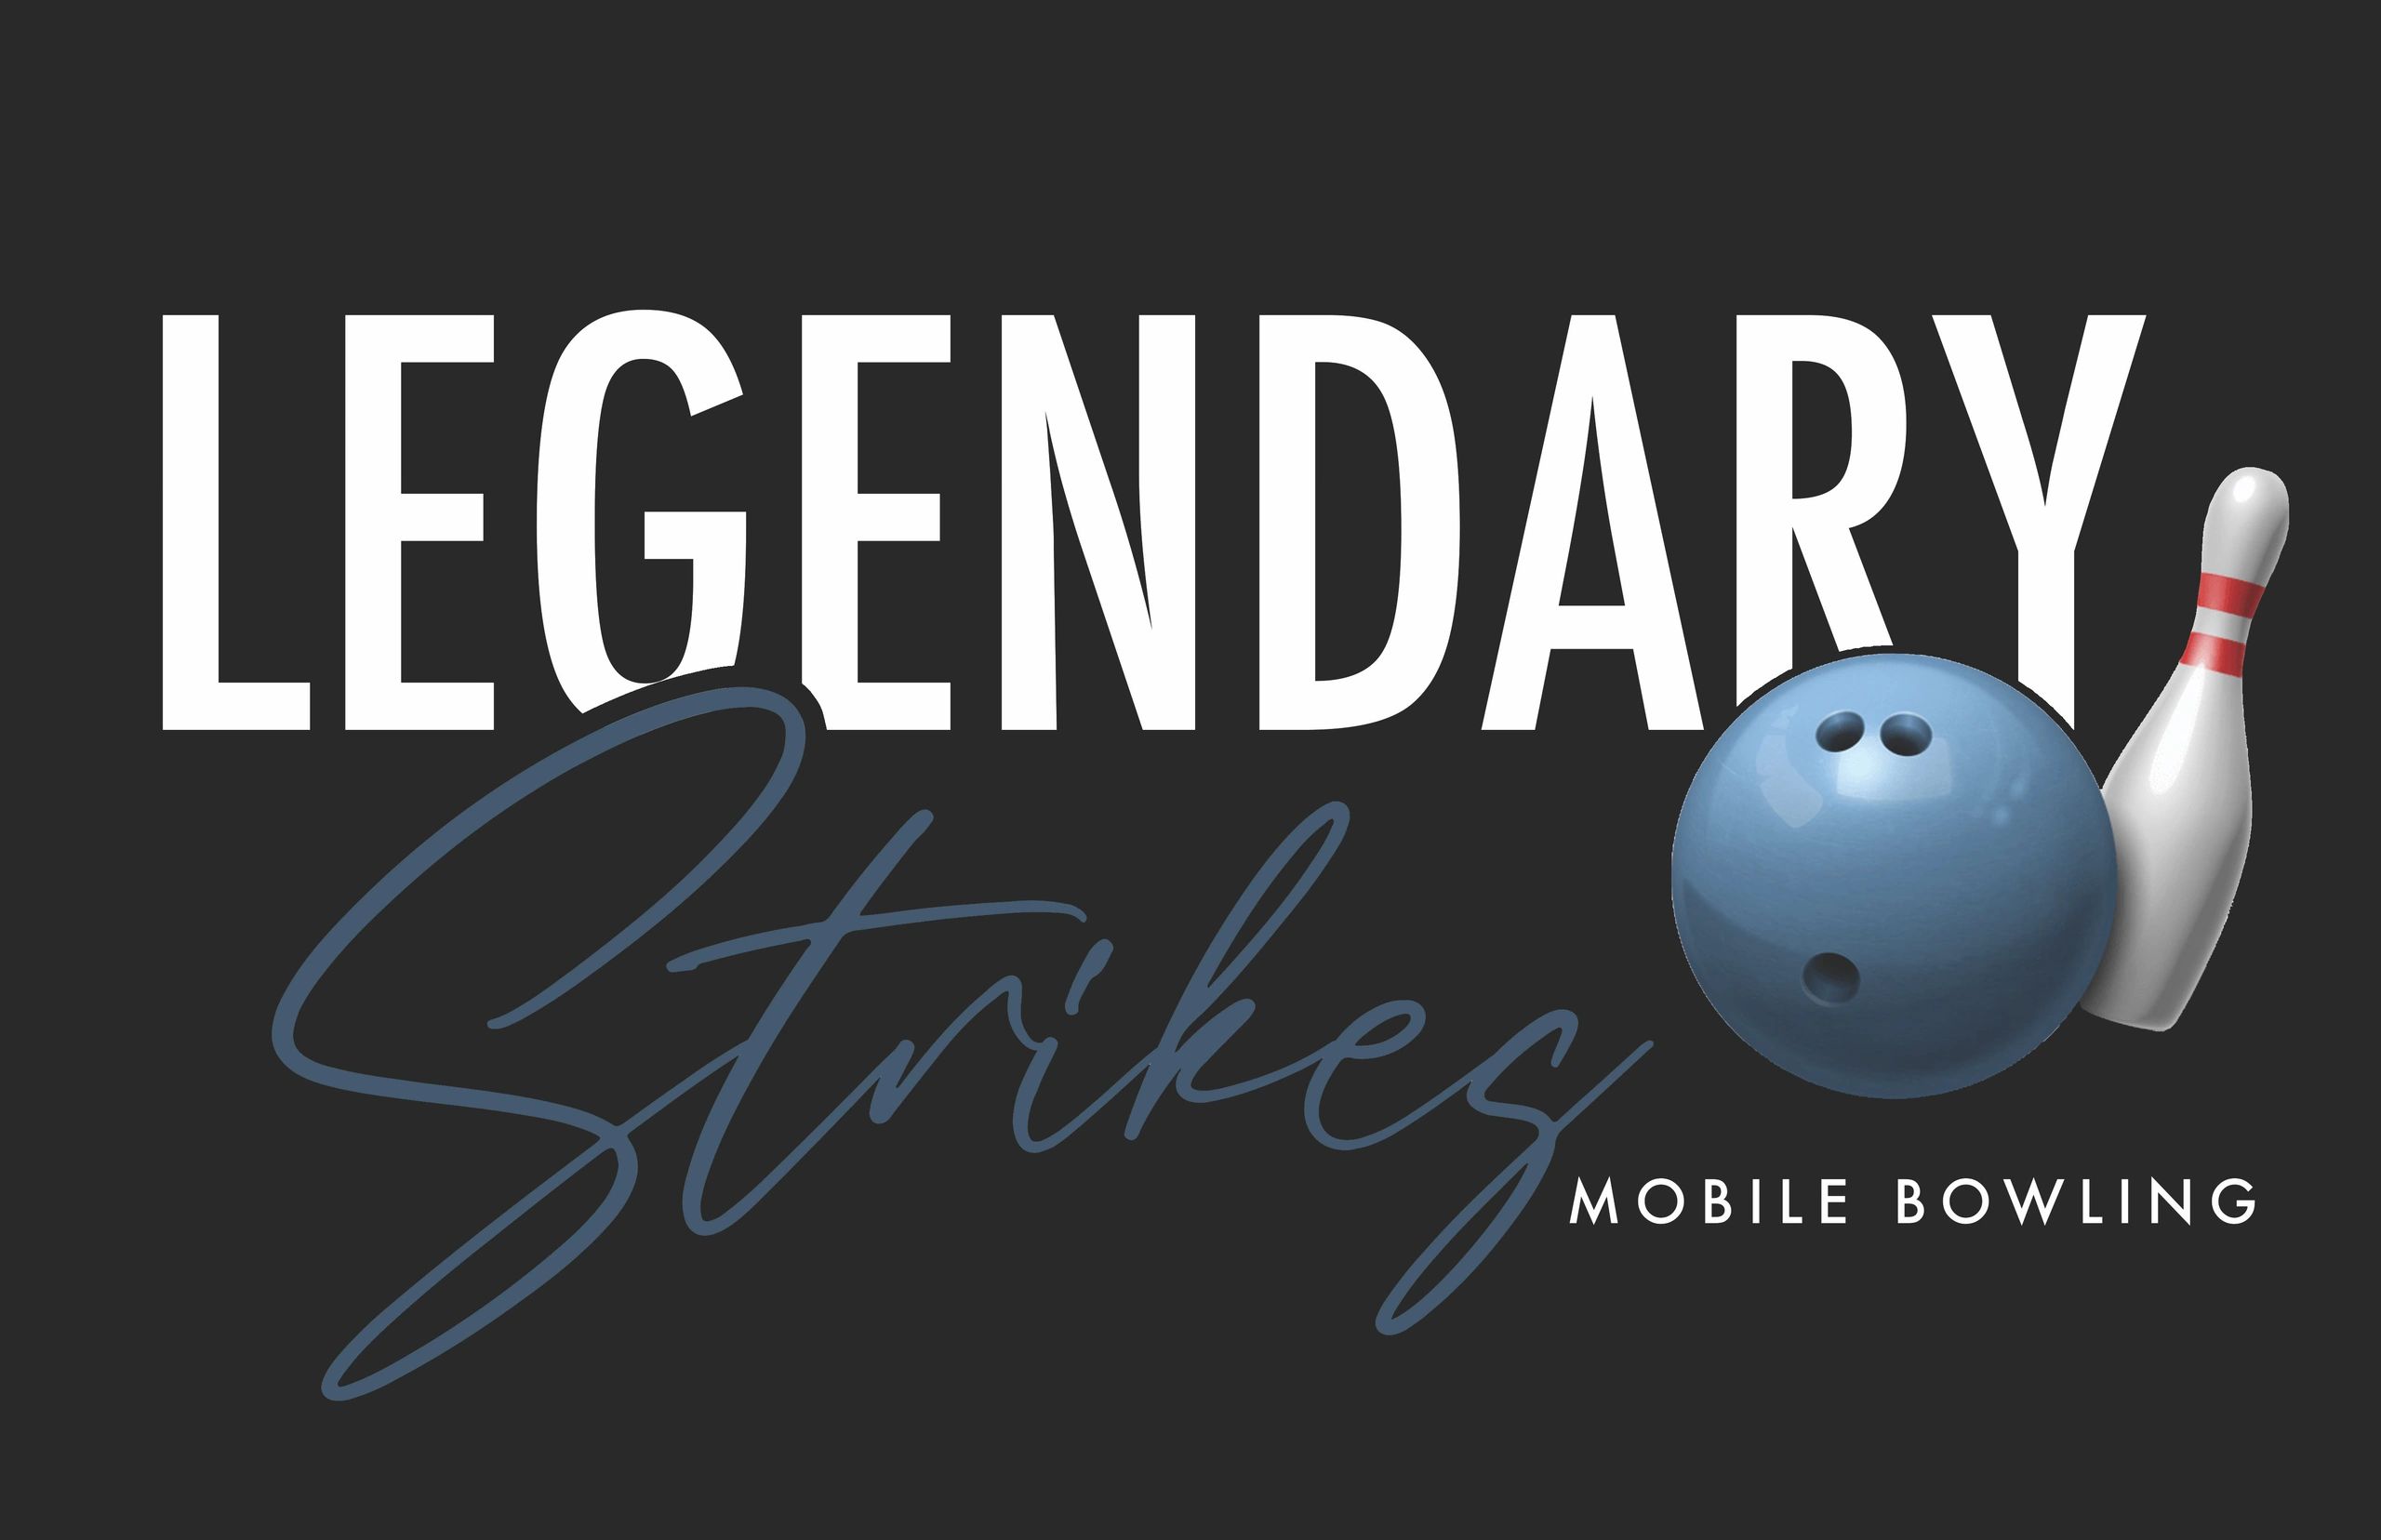 About 5 — Legendary Strikes Mobile Bowling